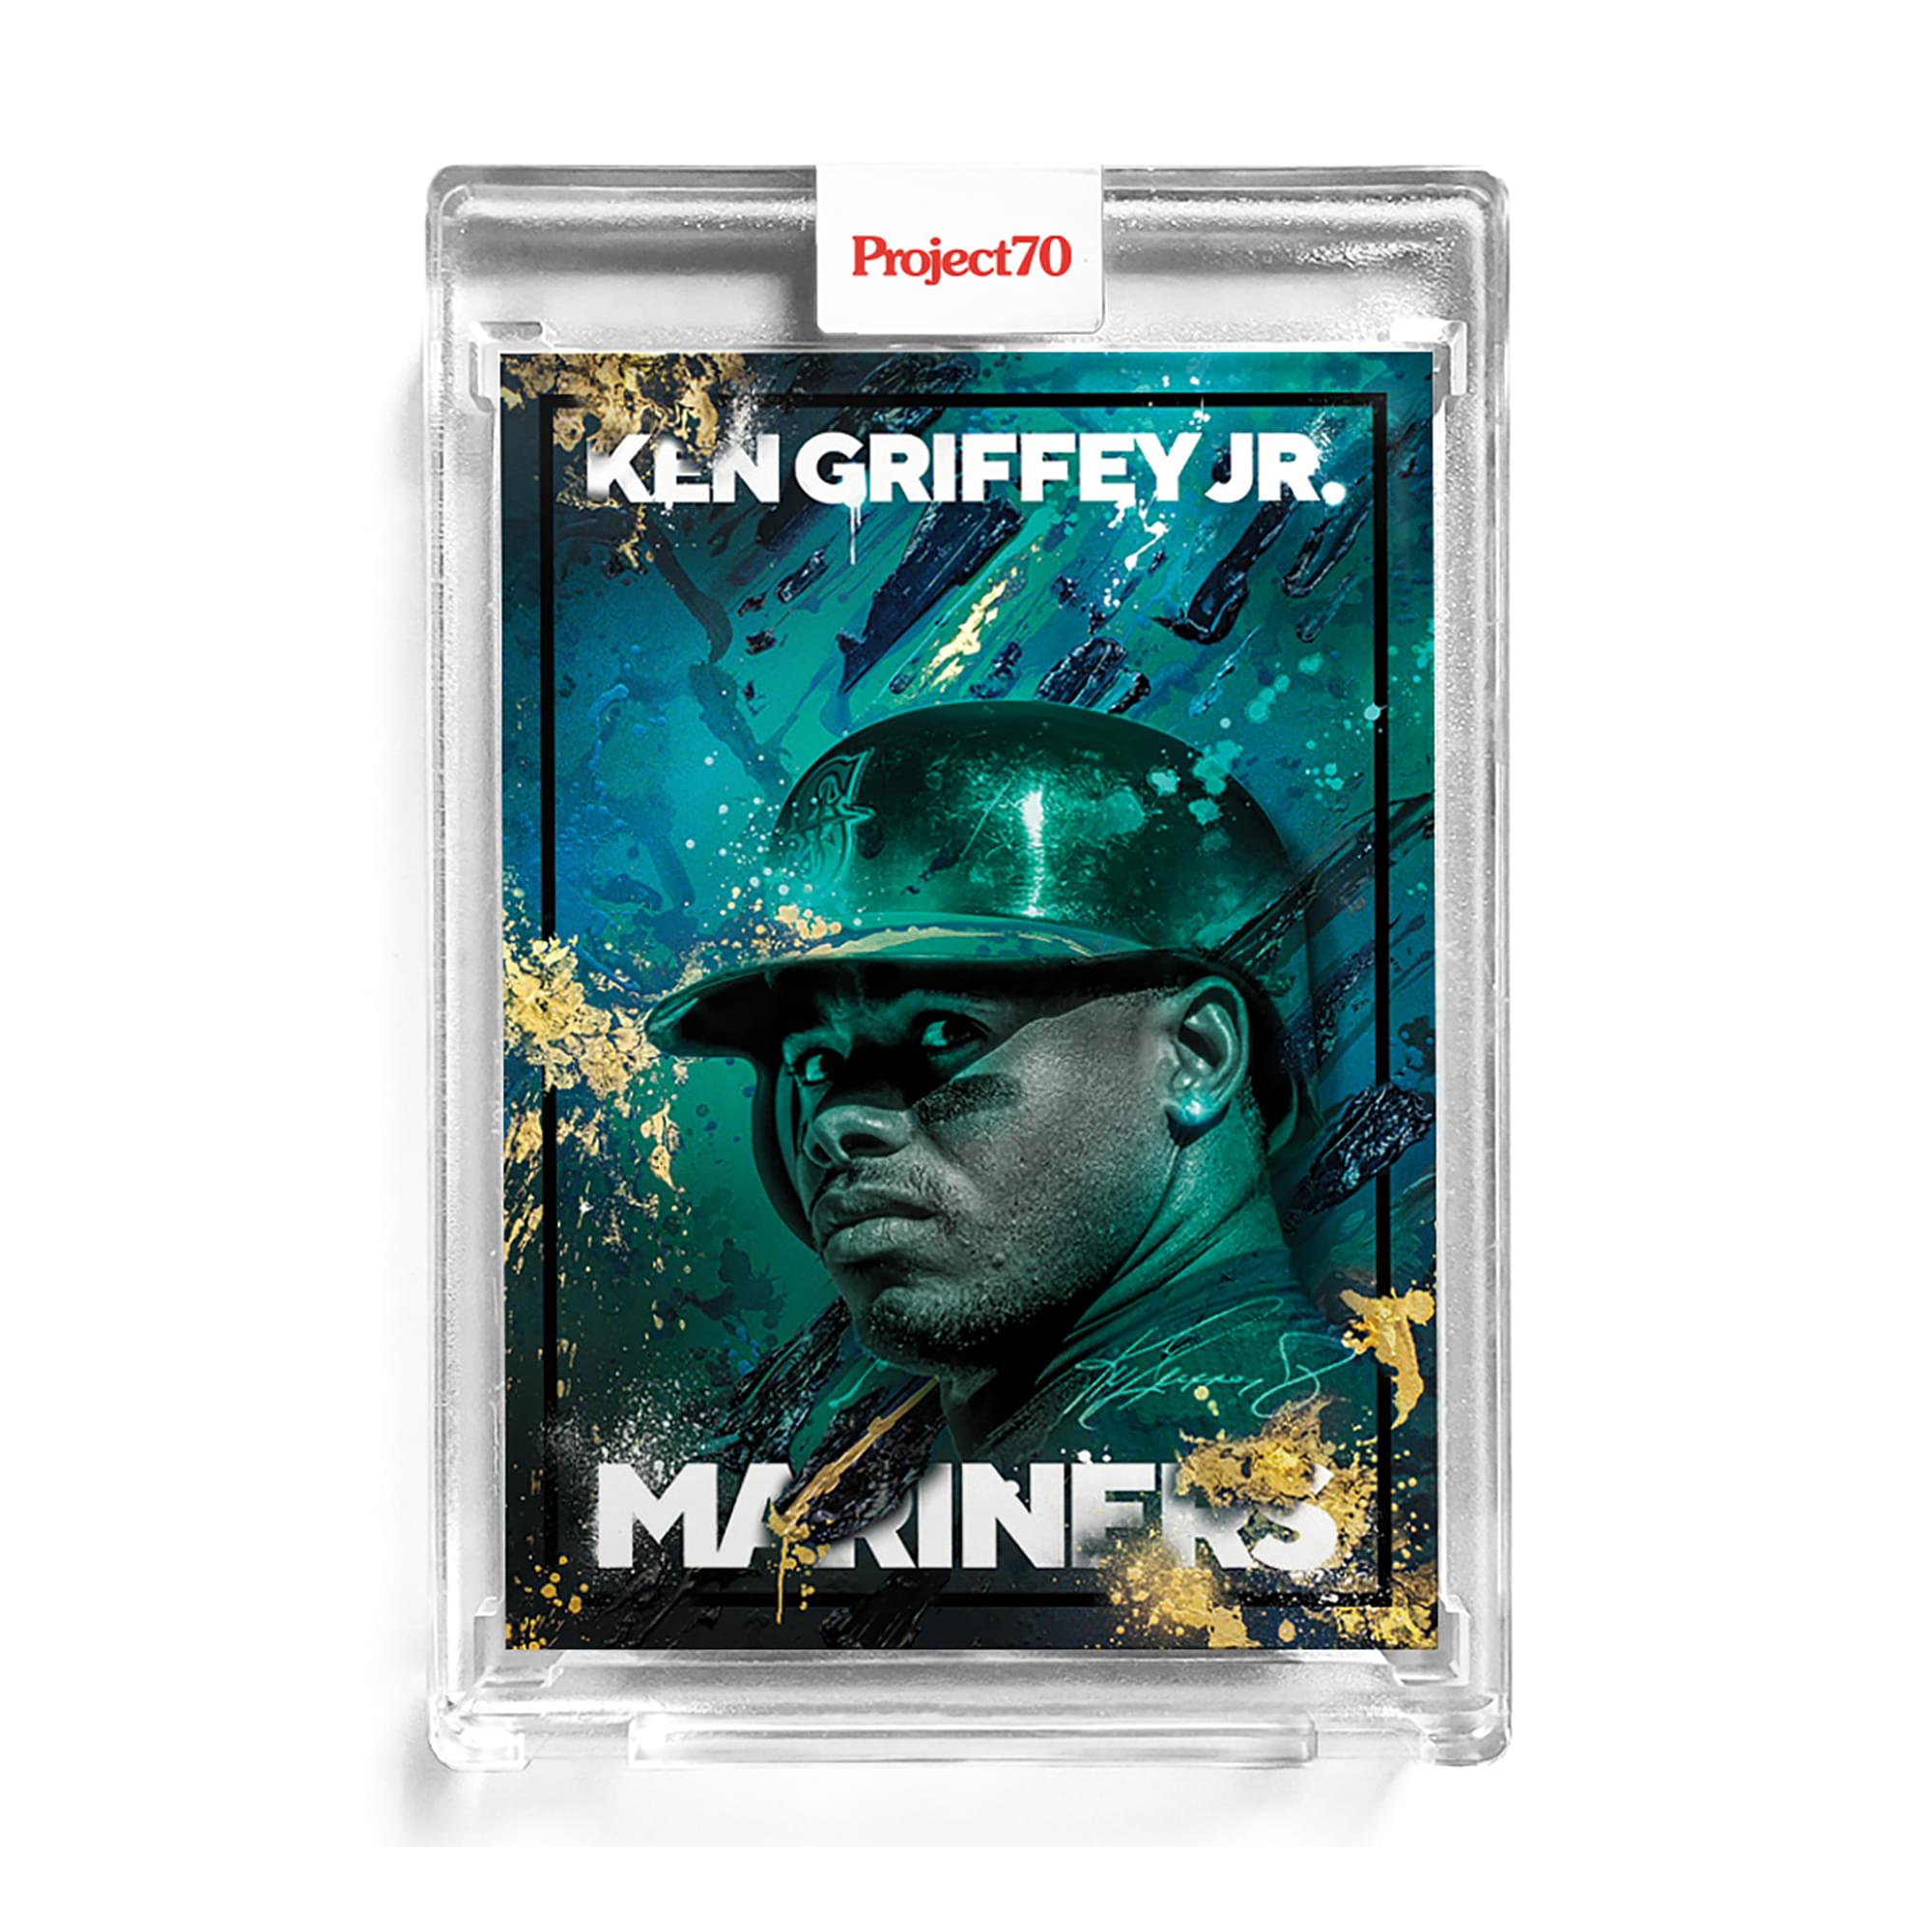 MLB Topps Project70 Card 236 , 1967 Ken Griffey Jr. By Mikael B